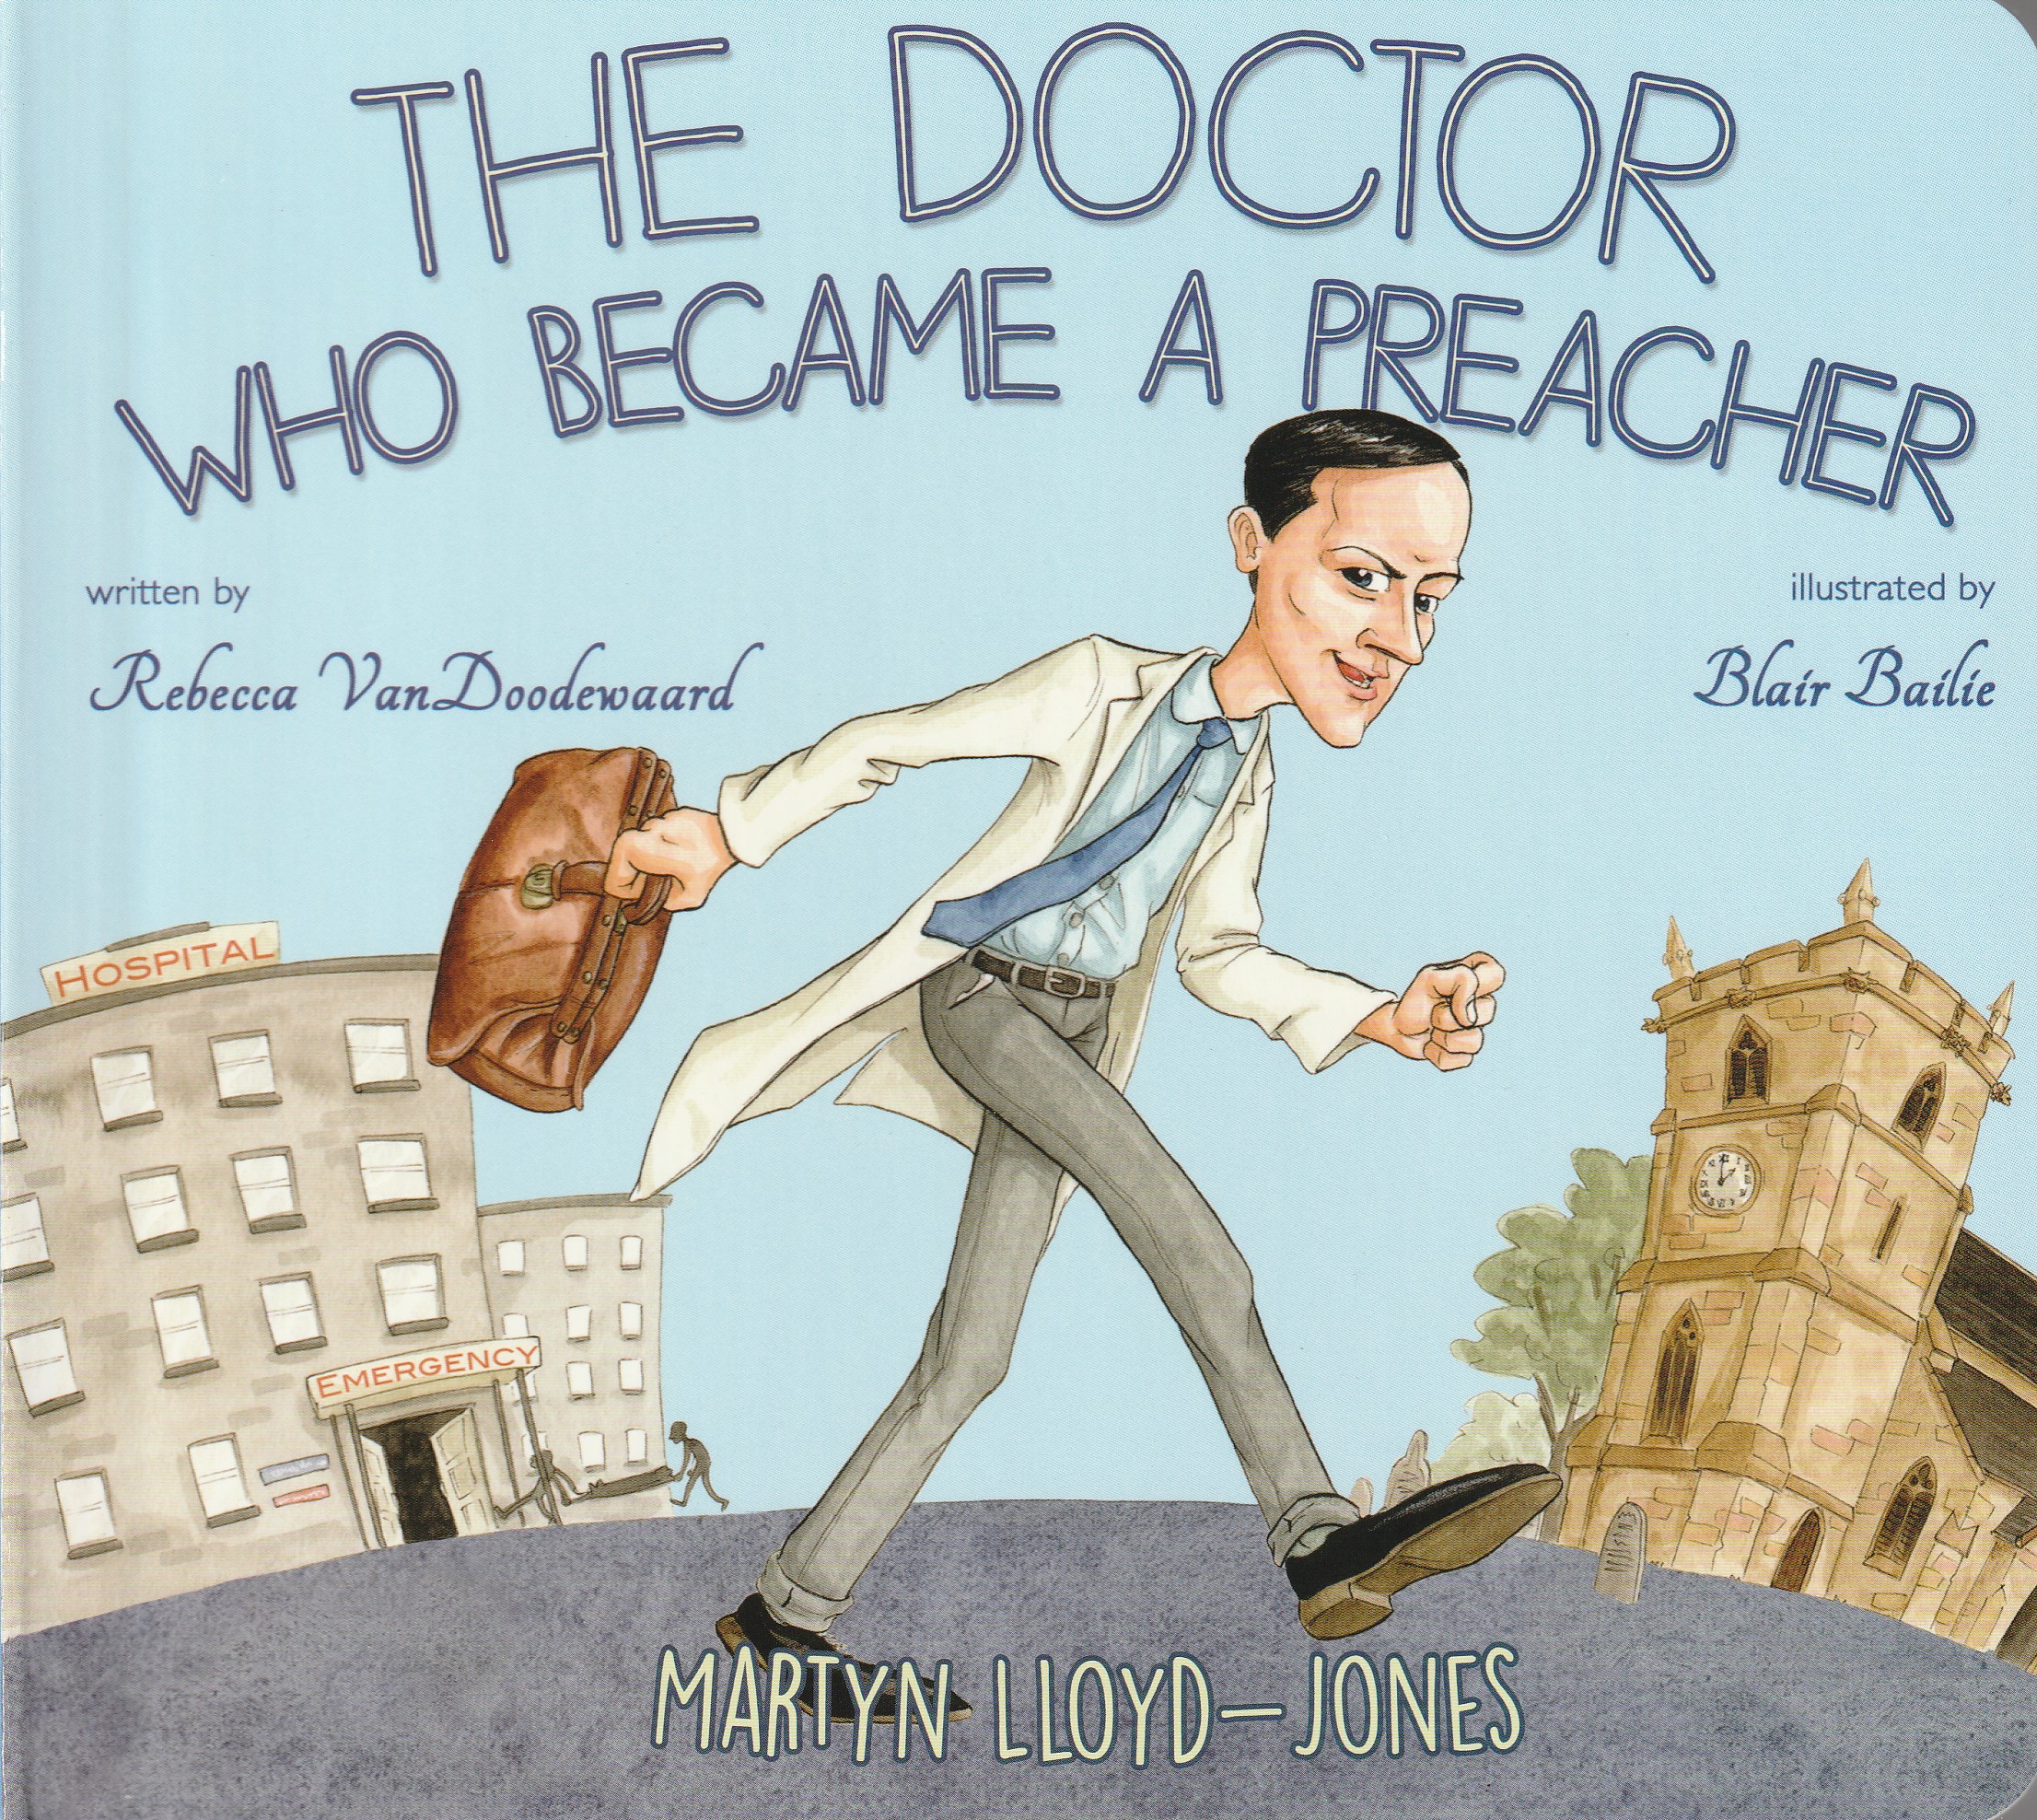 The Doctor Who Became a Preacher: Martyn Lloyd-Jones